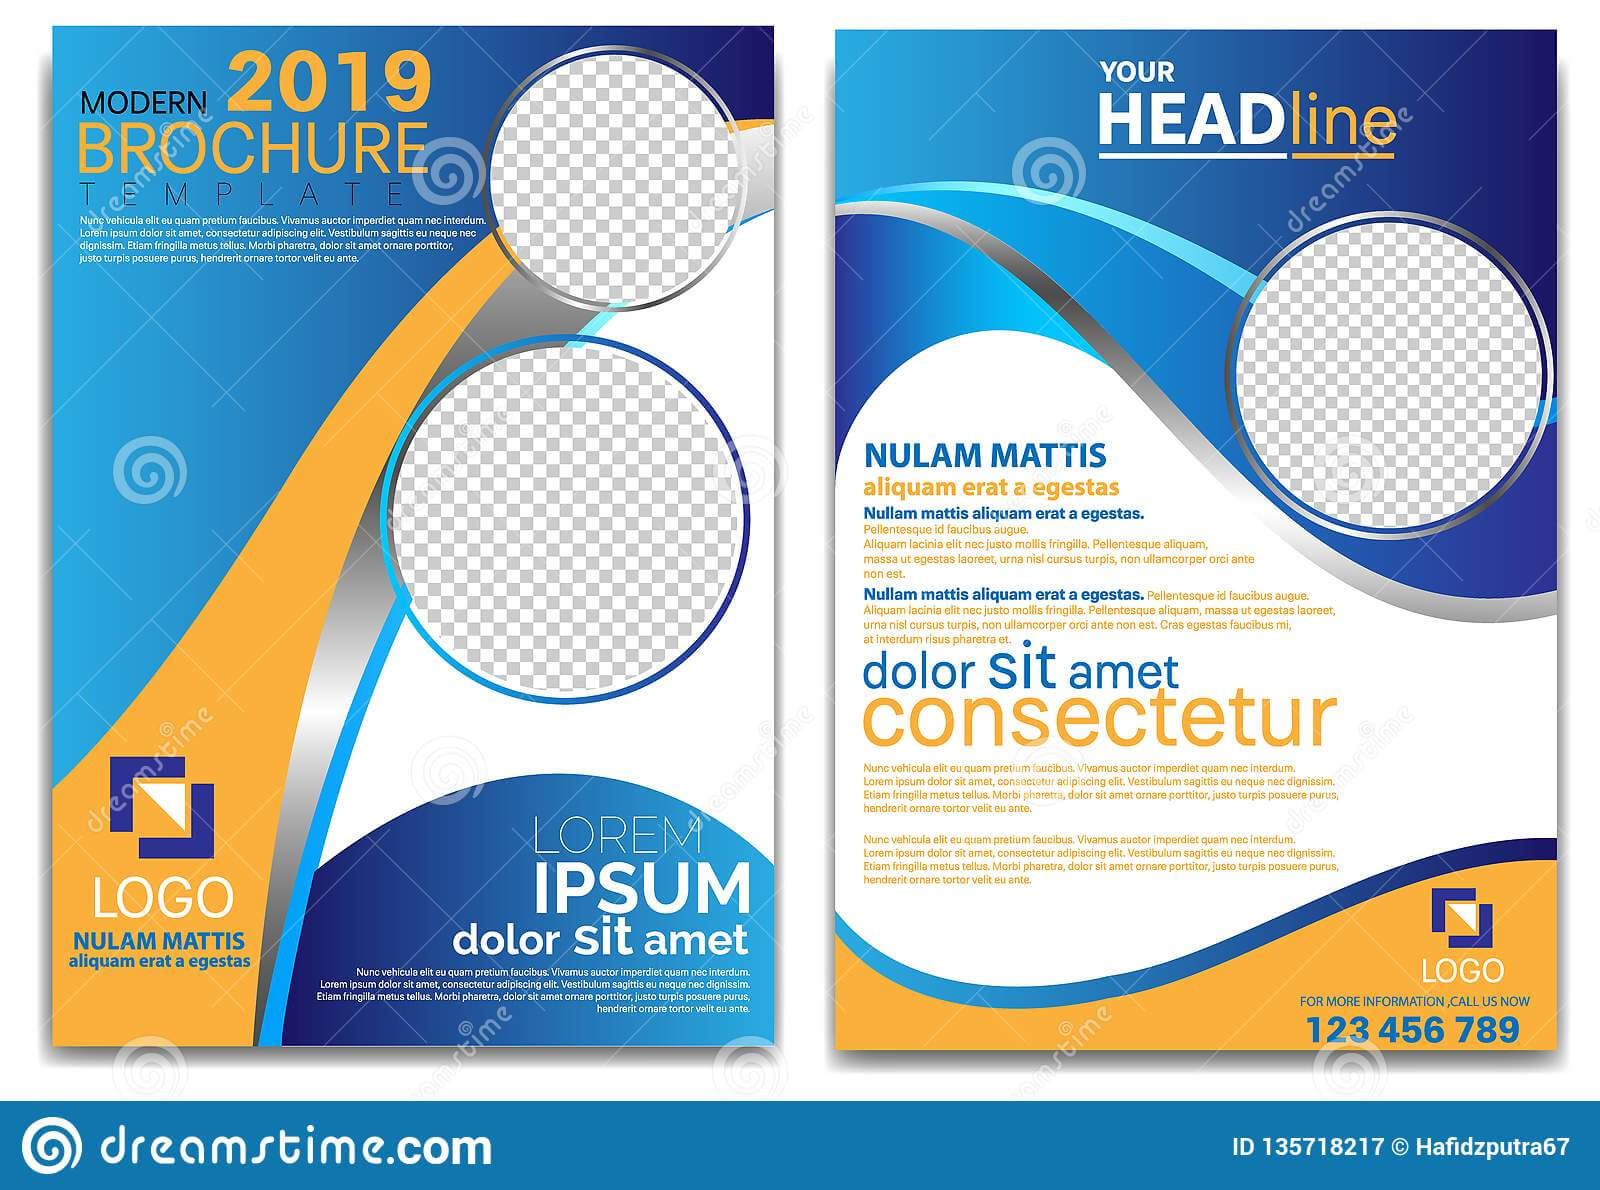 Modern Brochure Template 2019 And Professional Brochure Throughout School Brochure Design Templates